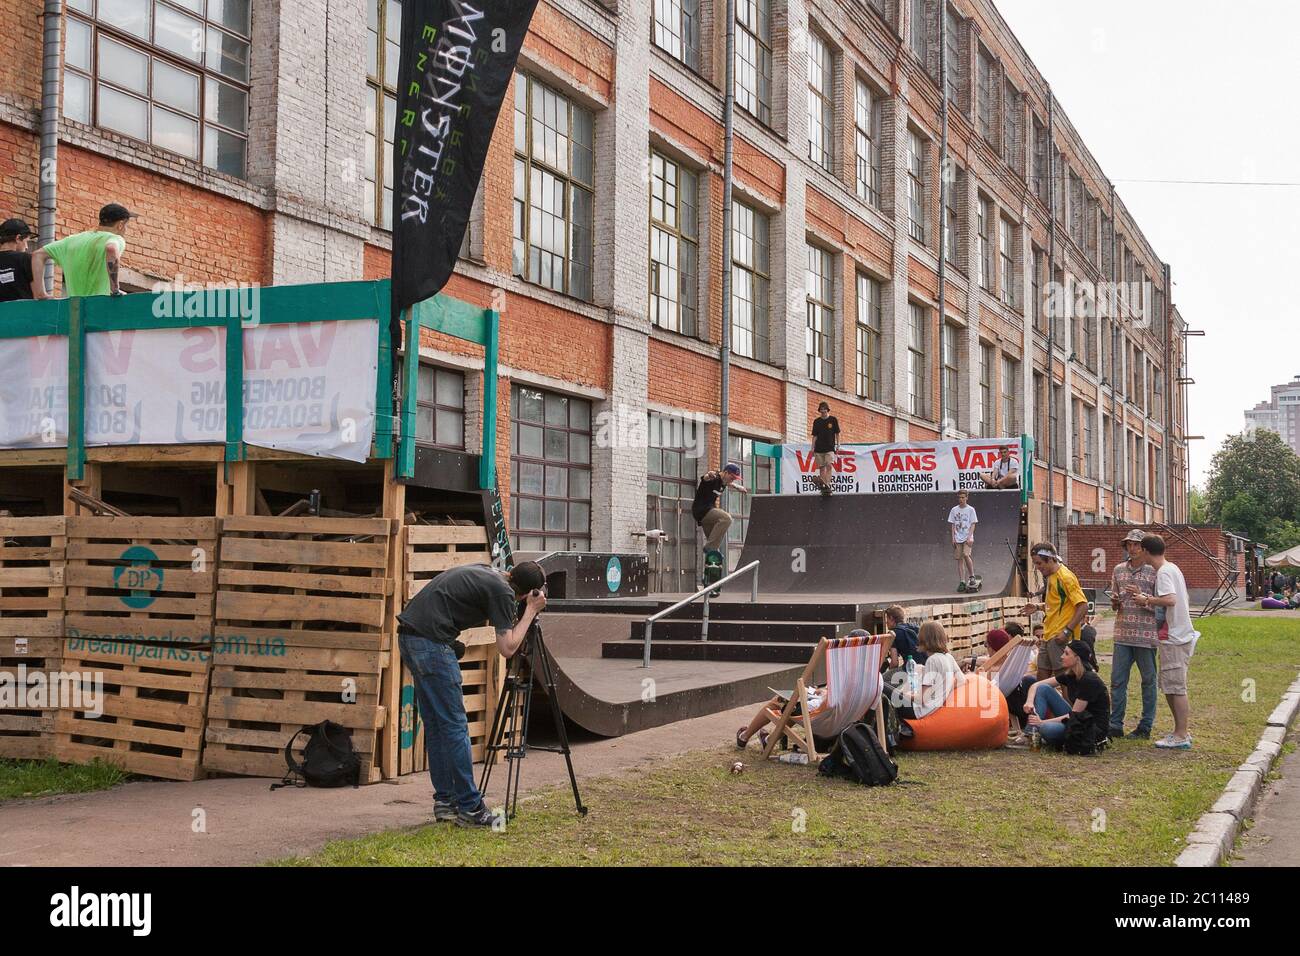 KIEV, UKRAINE - MAY 23, 2015: Sport competition with skateboarders jumping on a ramp at International Tattoo Convention Kyiv Tattoo Collection by Plan Stock Photo